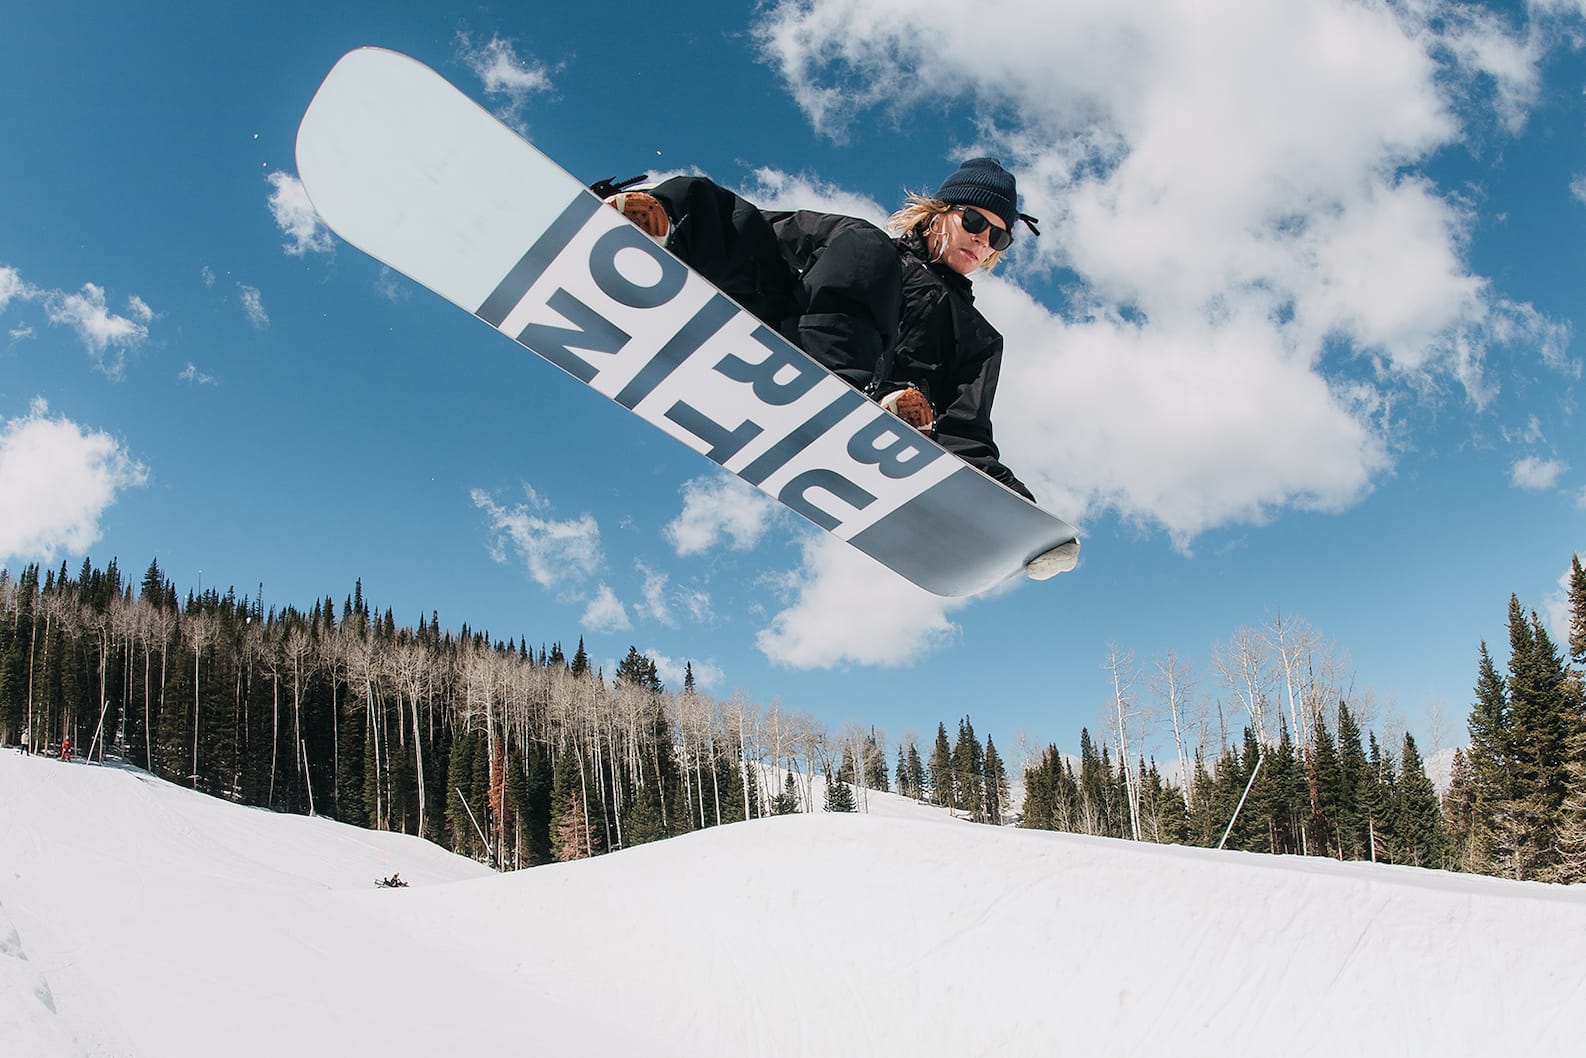 How to Unsubscribe from Burton Emails, Catalogs & SMS | Burton Snowboards